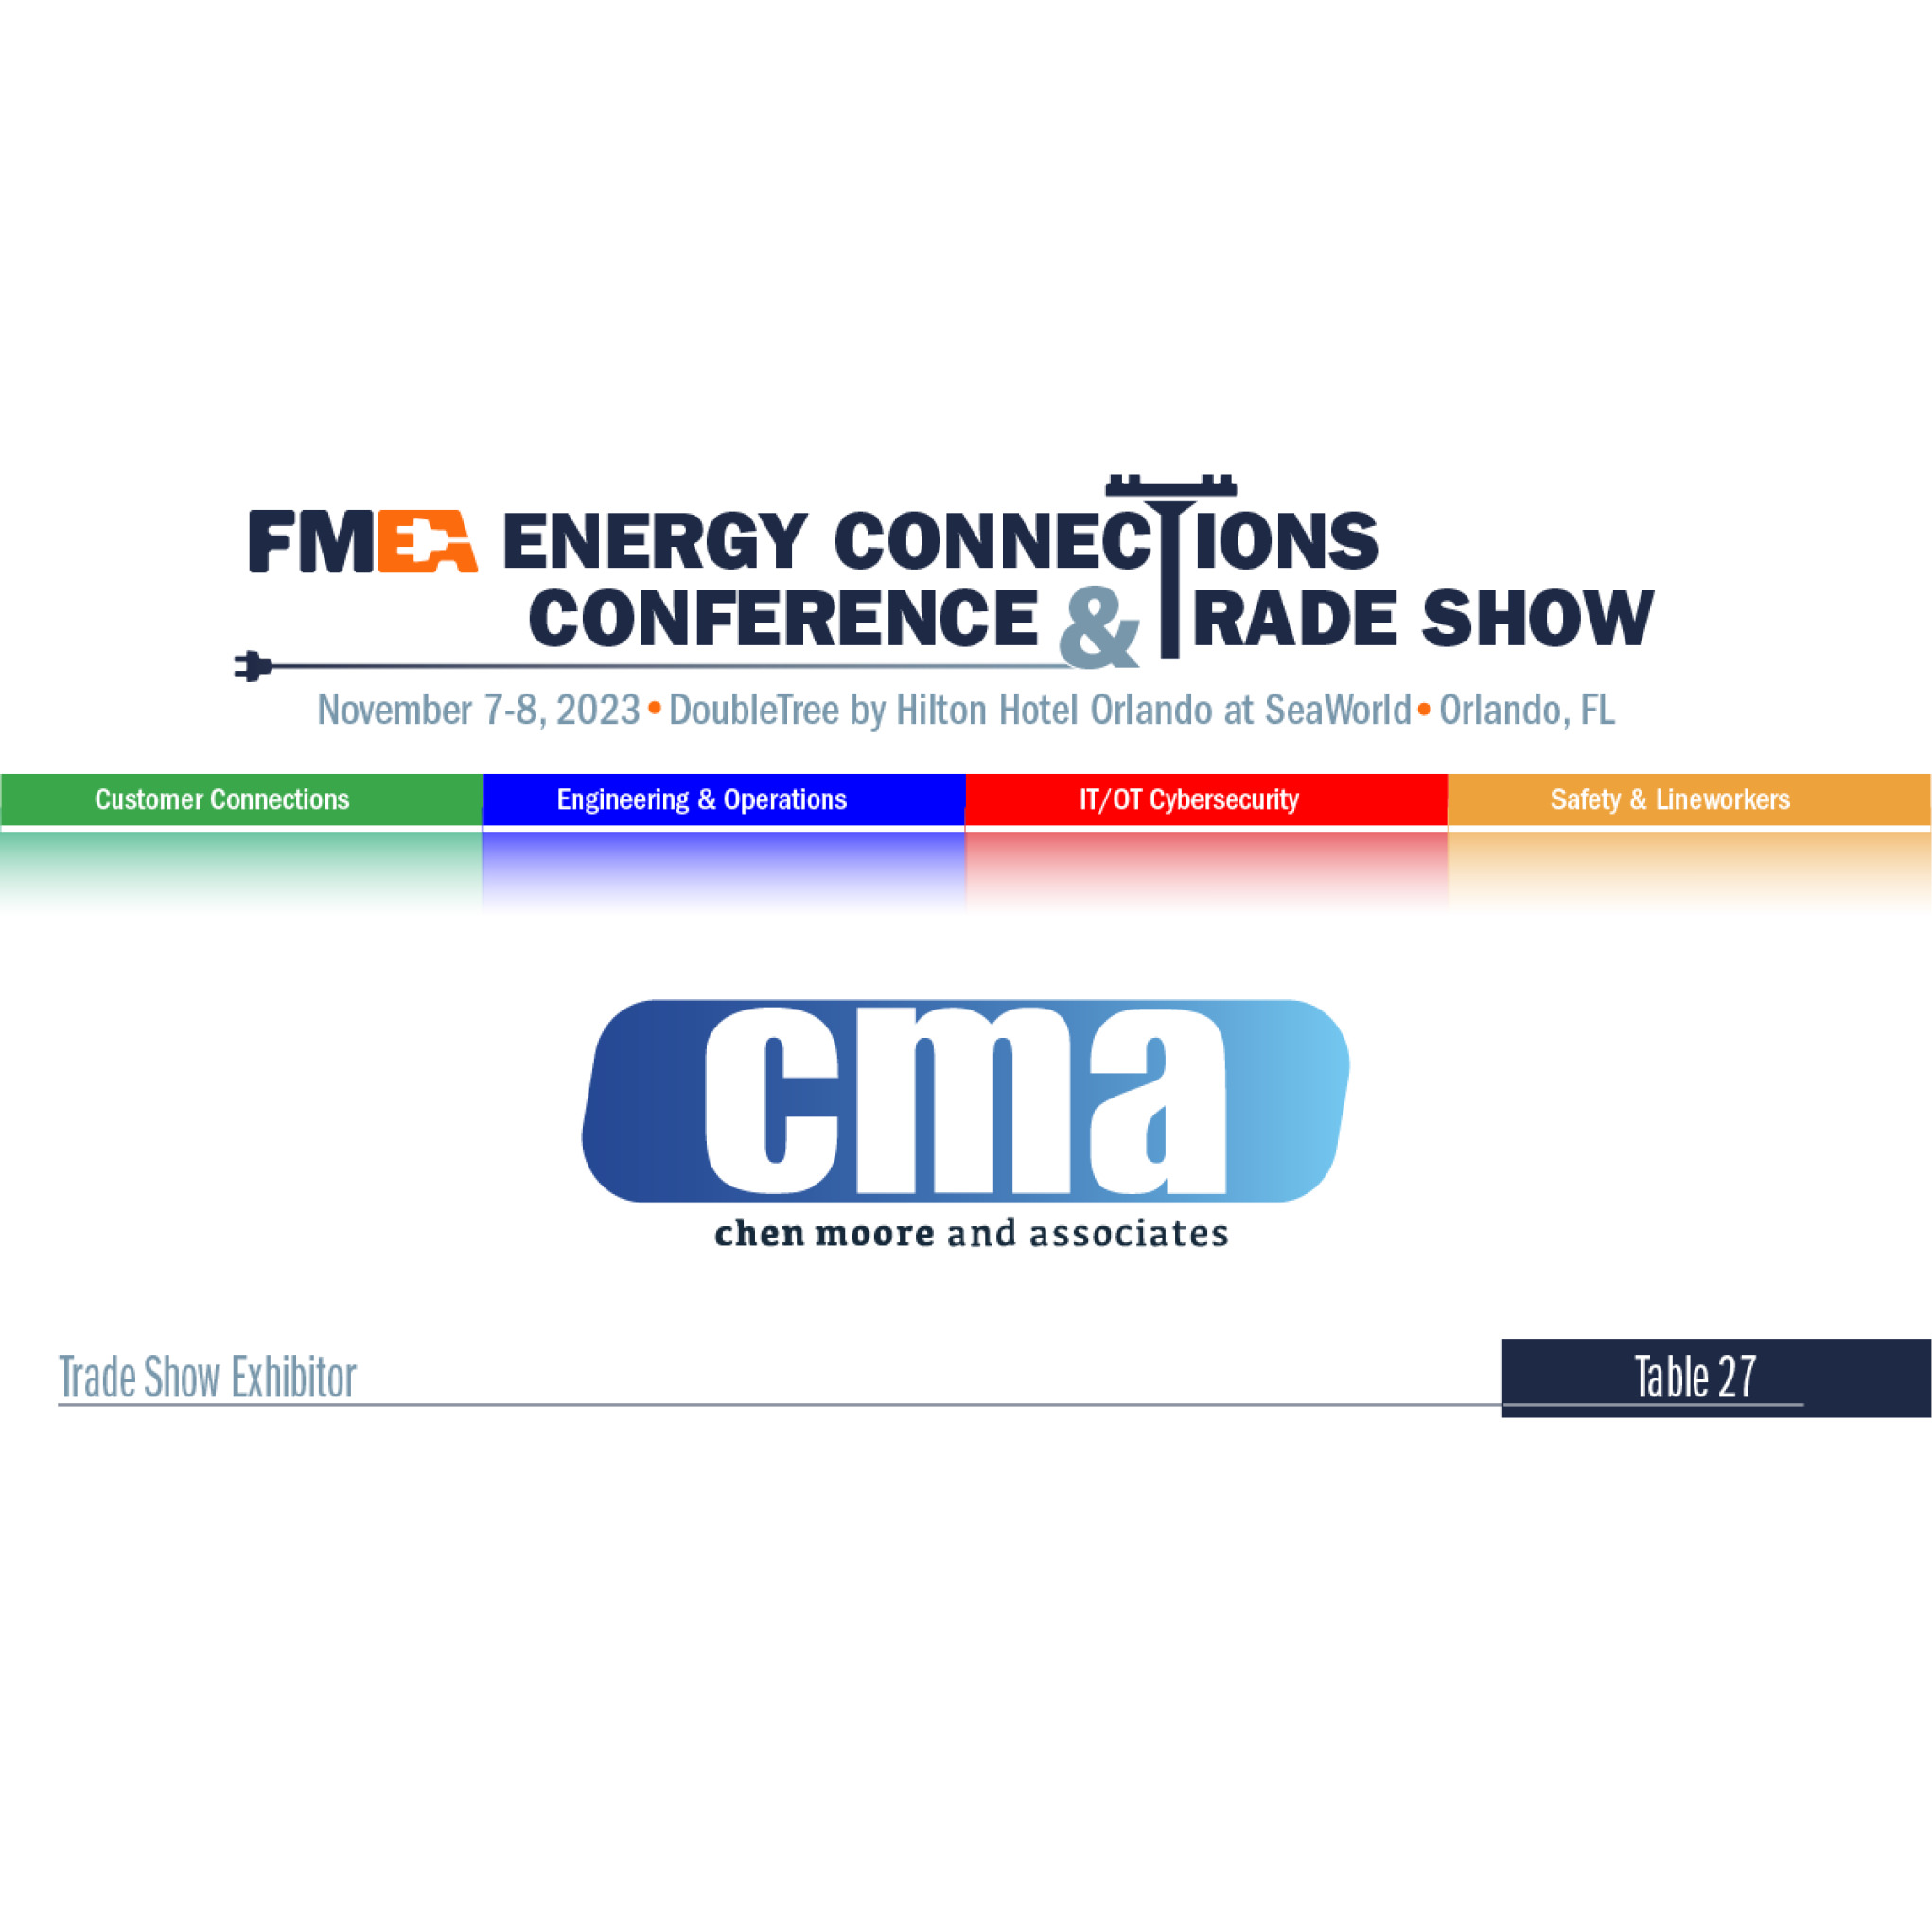 FMEA Energy Connections Conference & Trade Show